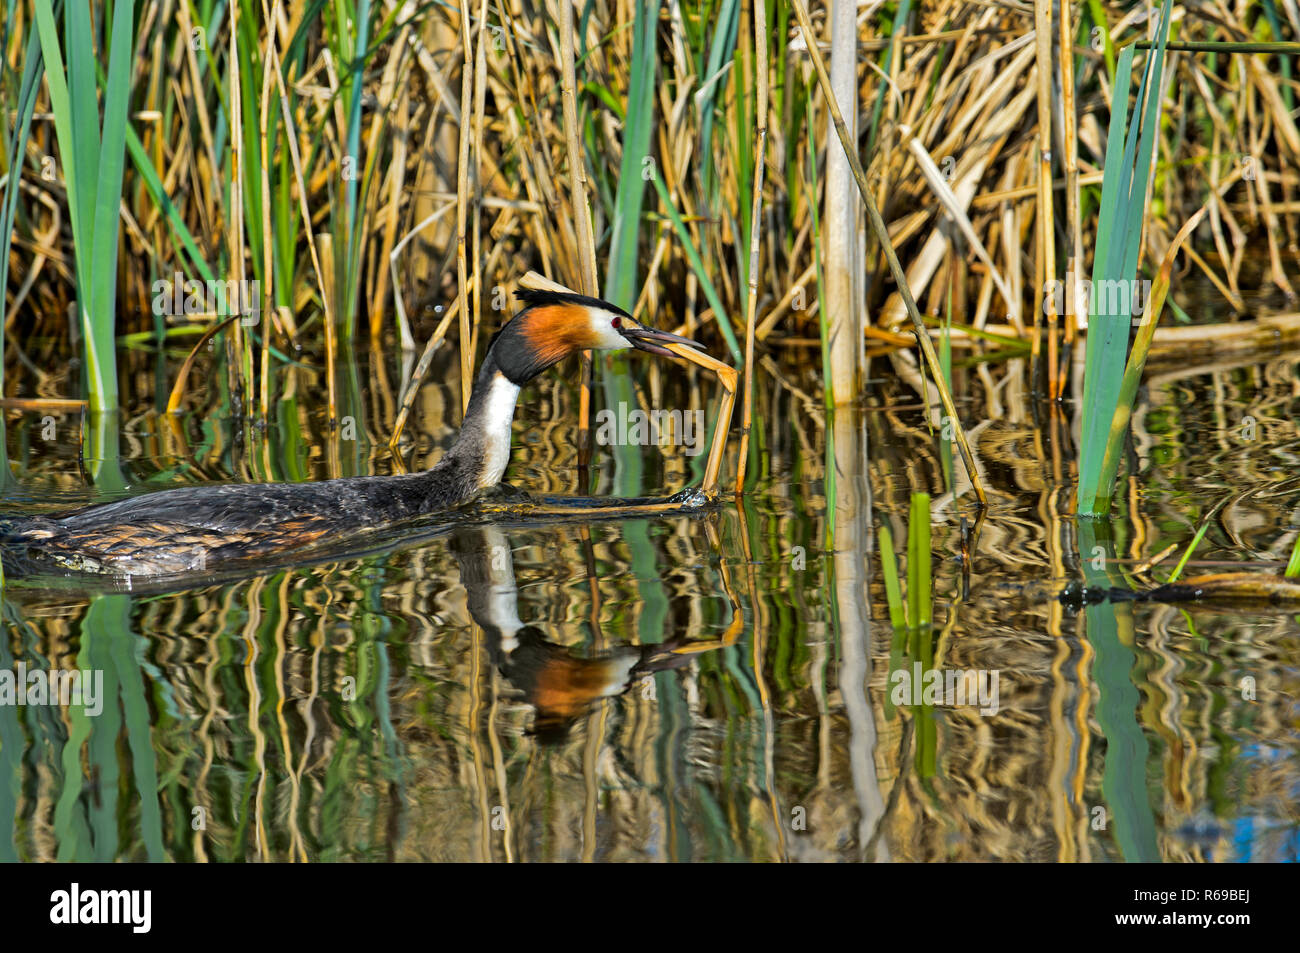 Great Crested Grebe Podiceps Cristatus Bringing Nesting Material To The Nest, Netherlands Stock Photo